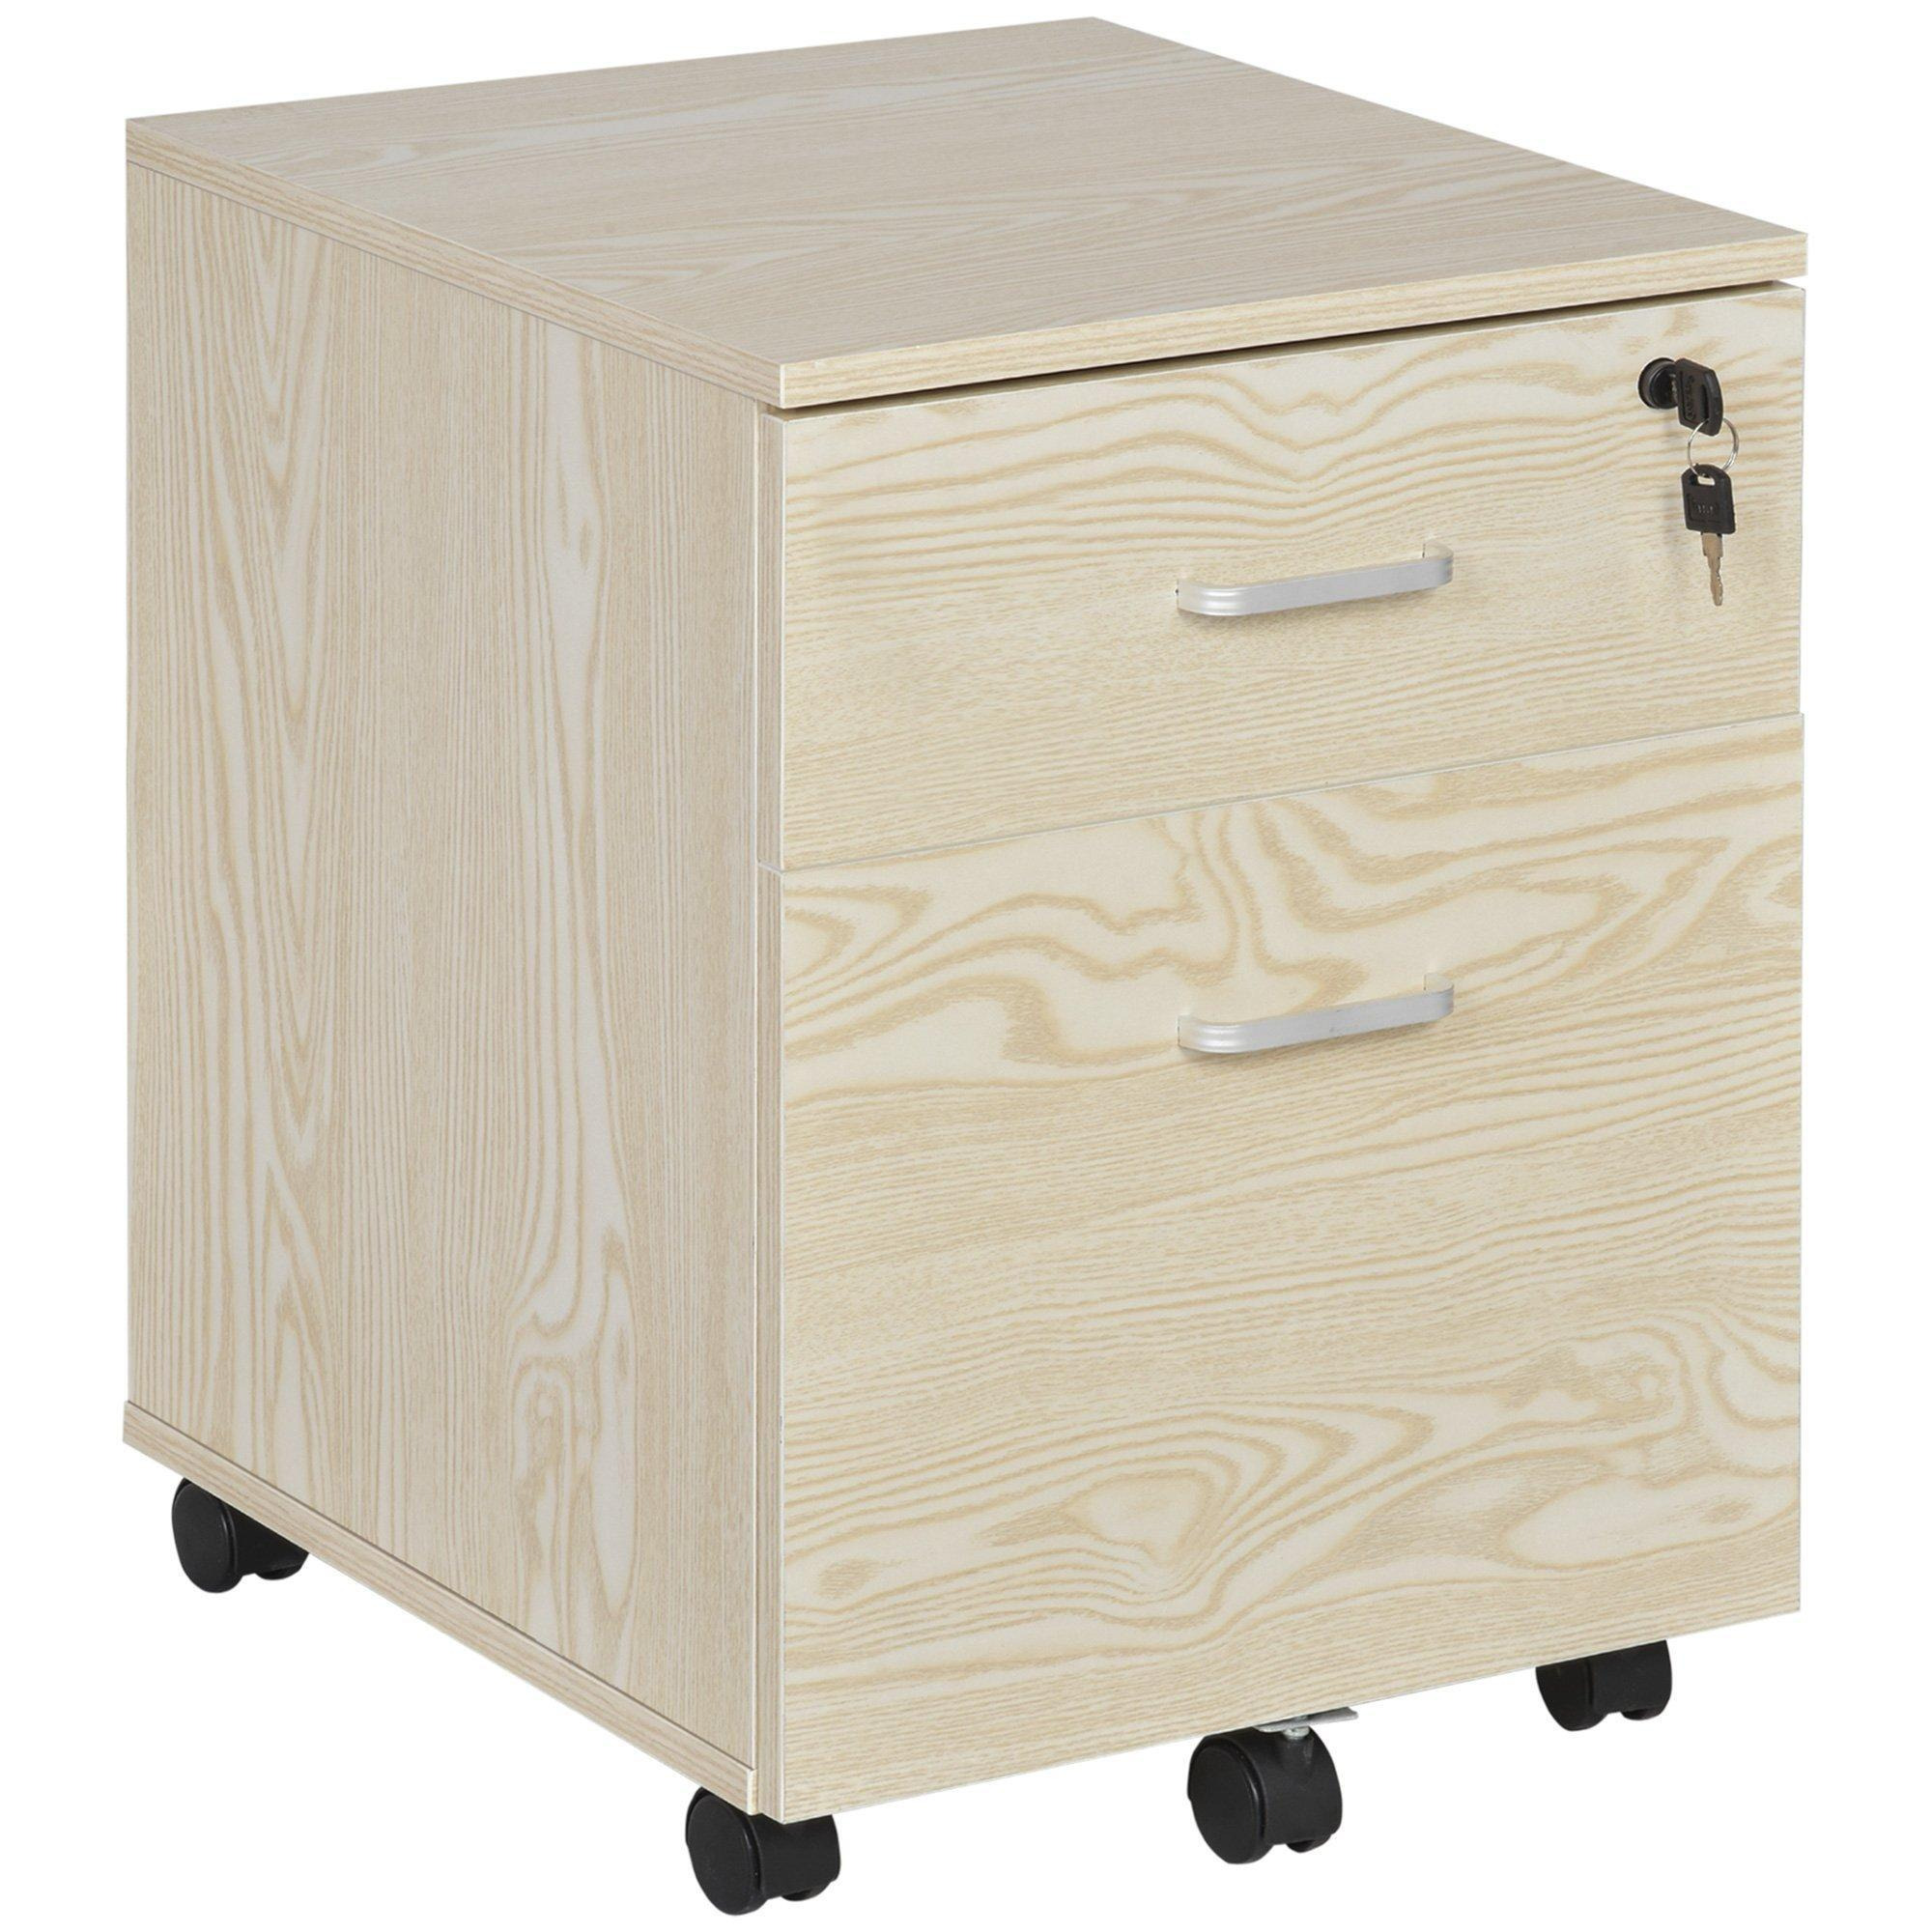 2-Drawer Locking Office Filing Cabinet with 5 Wheels Rolling Storage - image 1